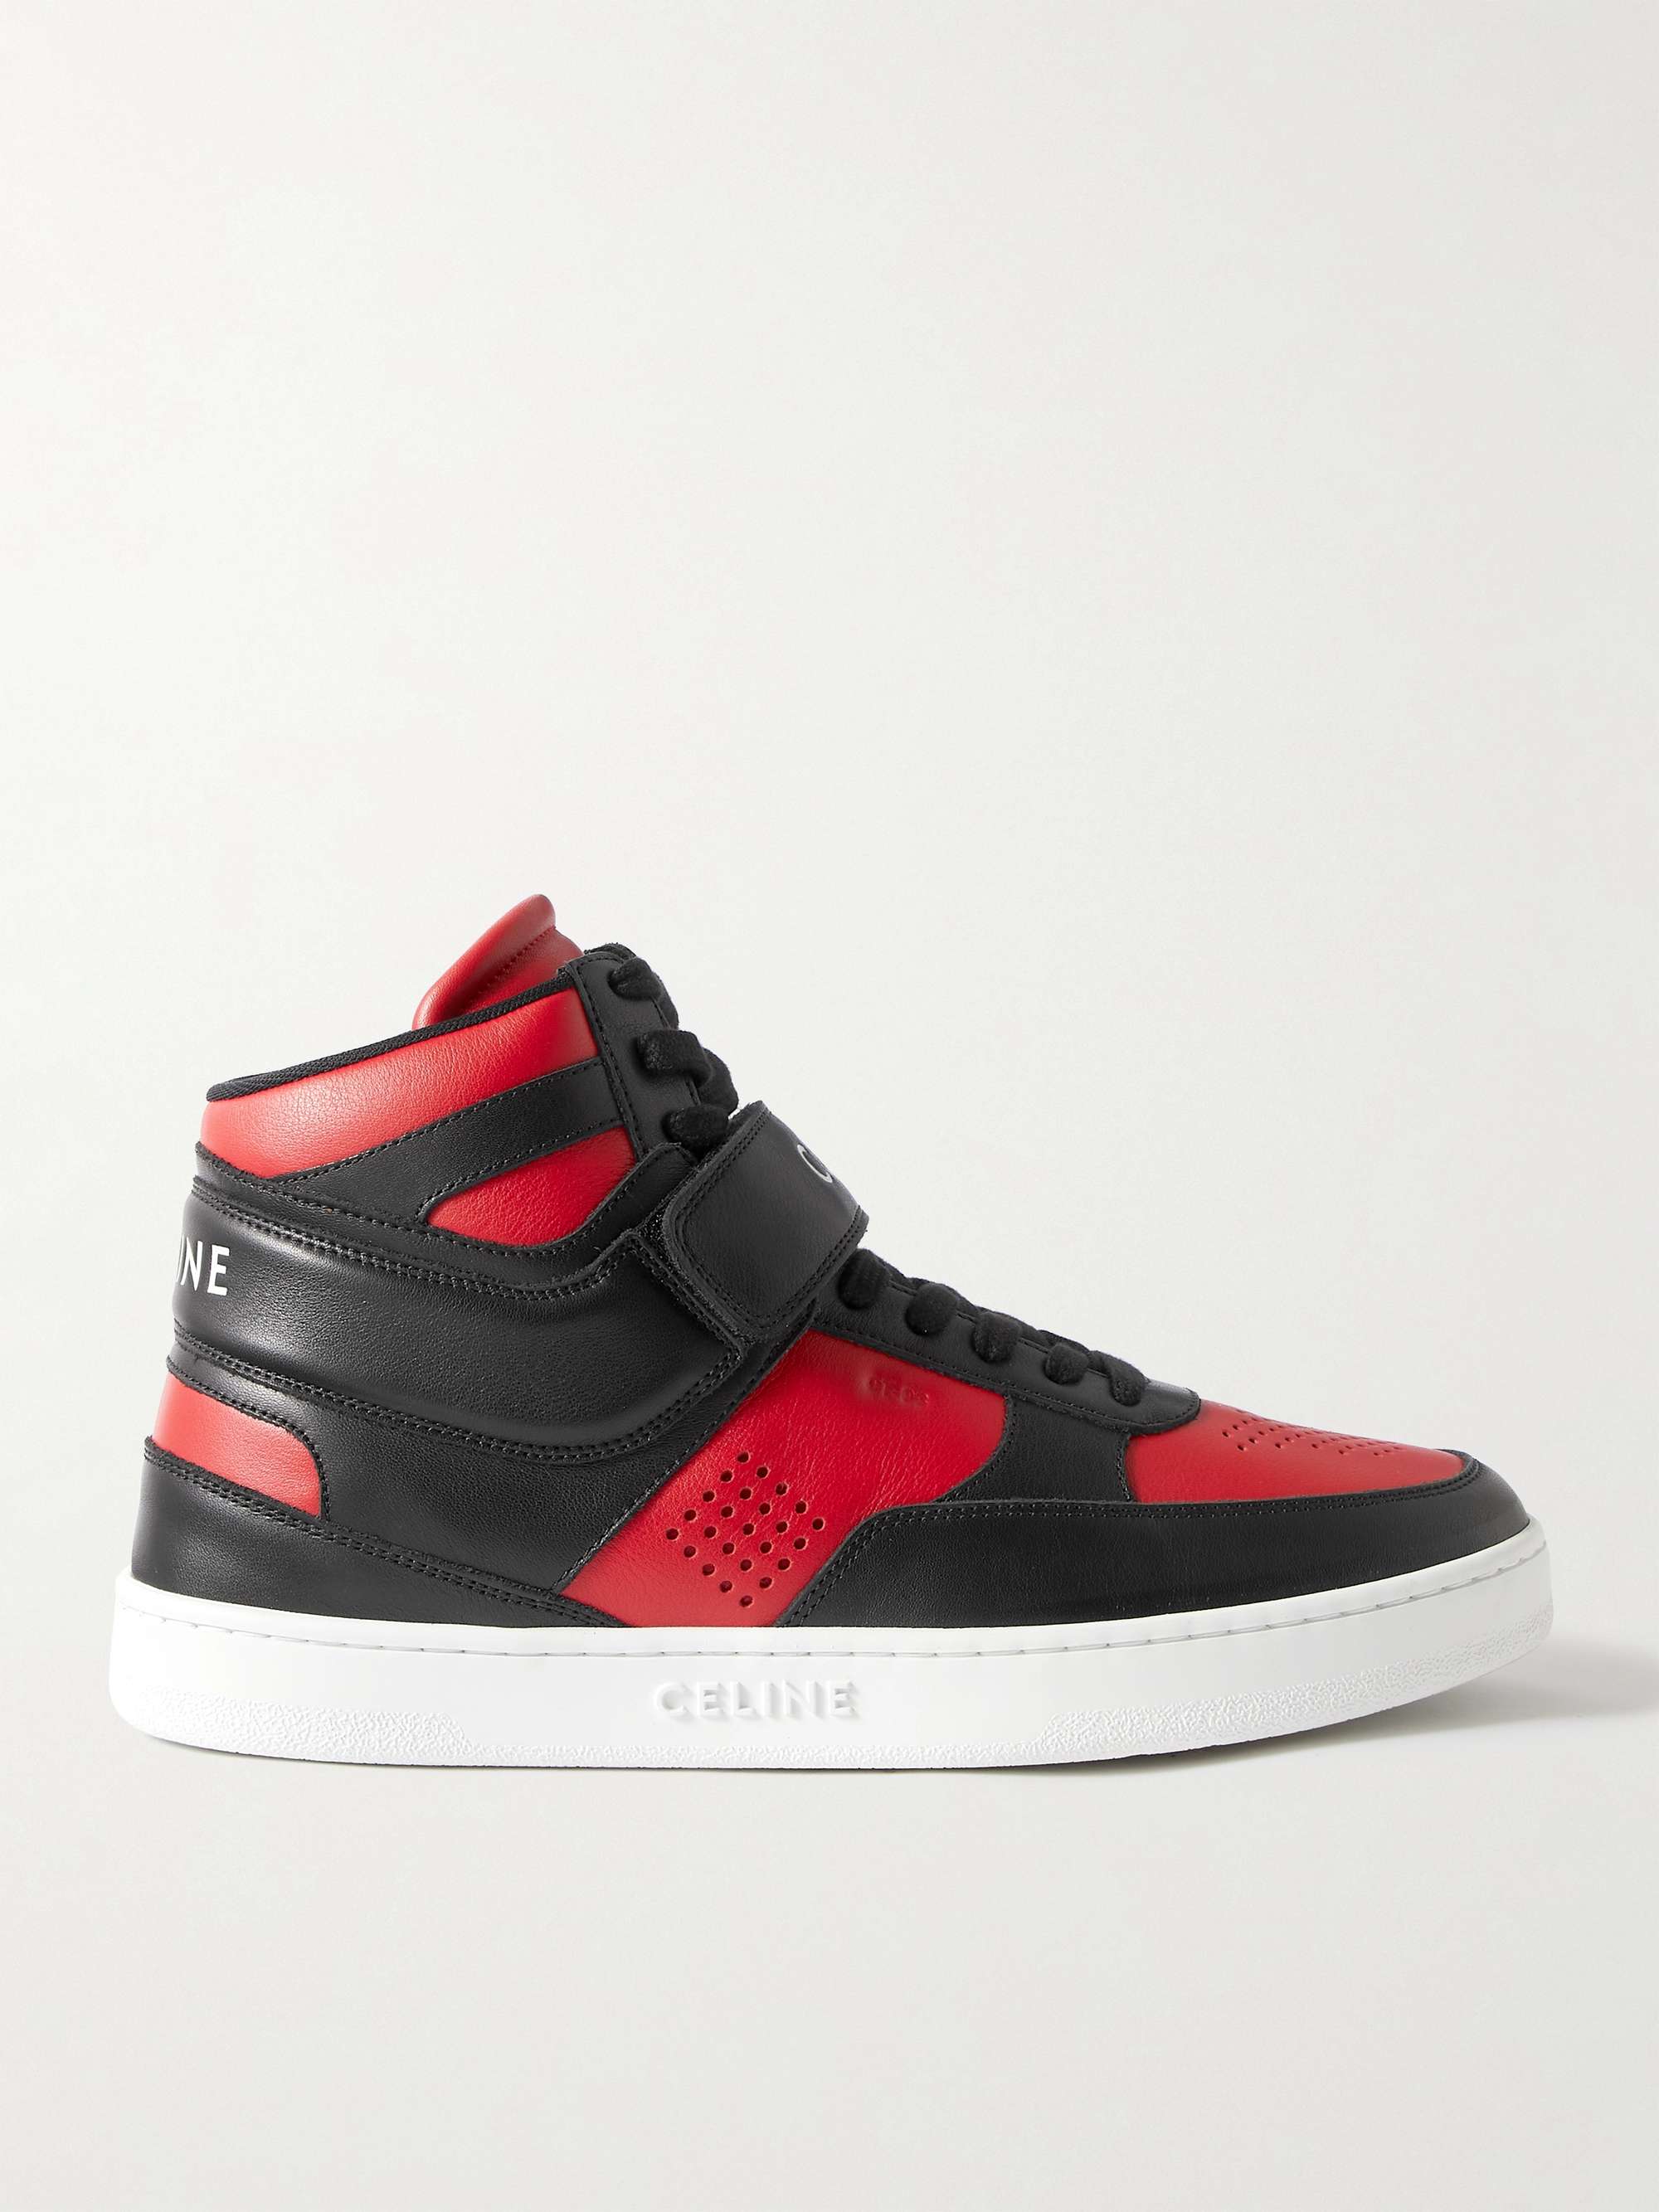 CELINE HOMME CT-03 Leather High-Top Sneakers